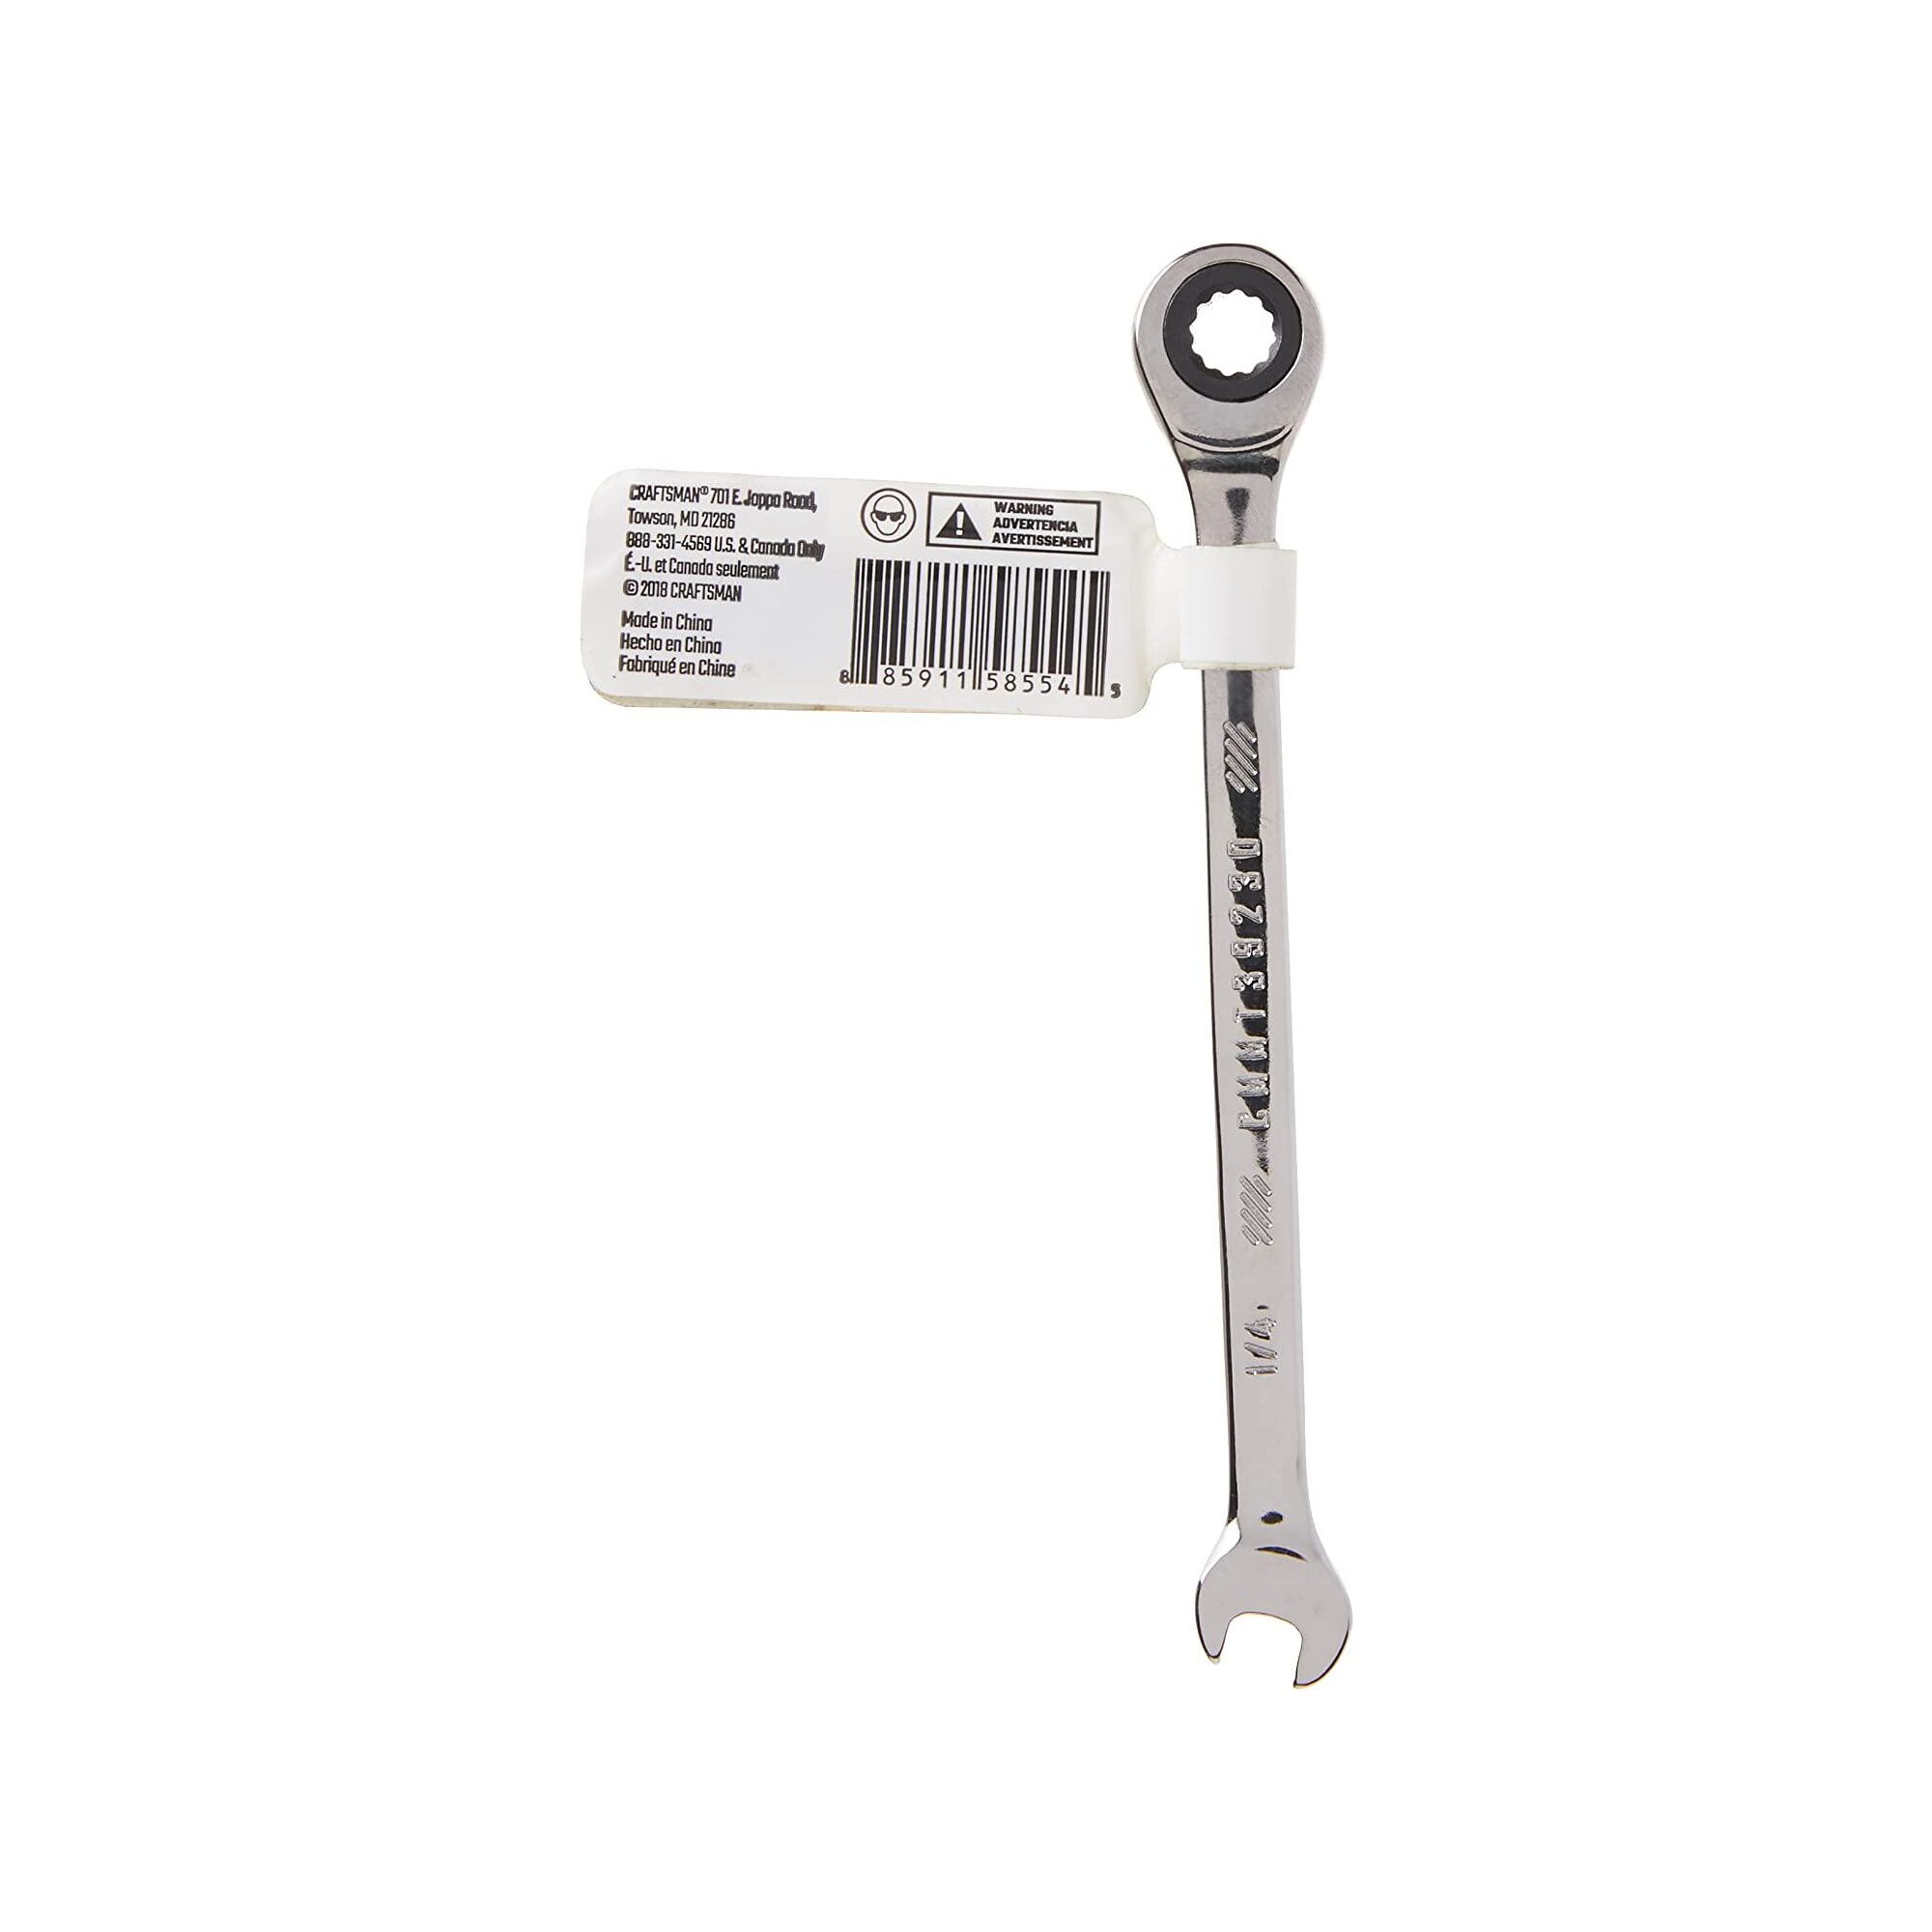 View of CRAFTSMAN Wrenches: Ratcheting packaging